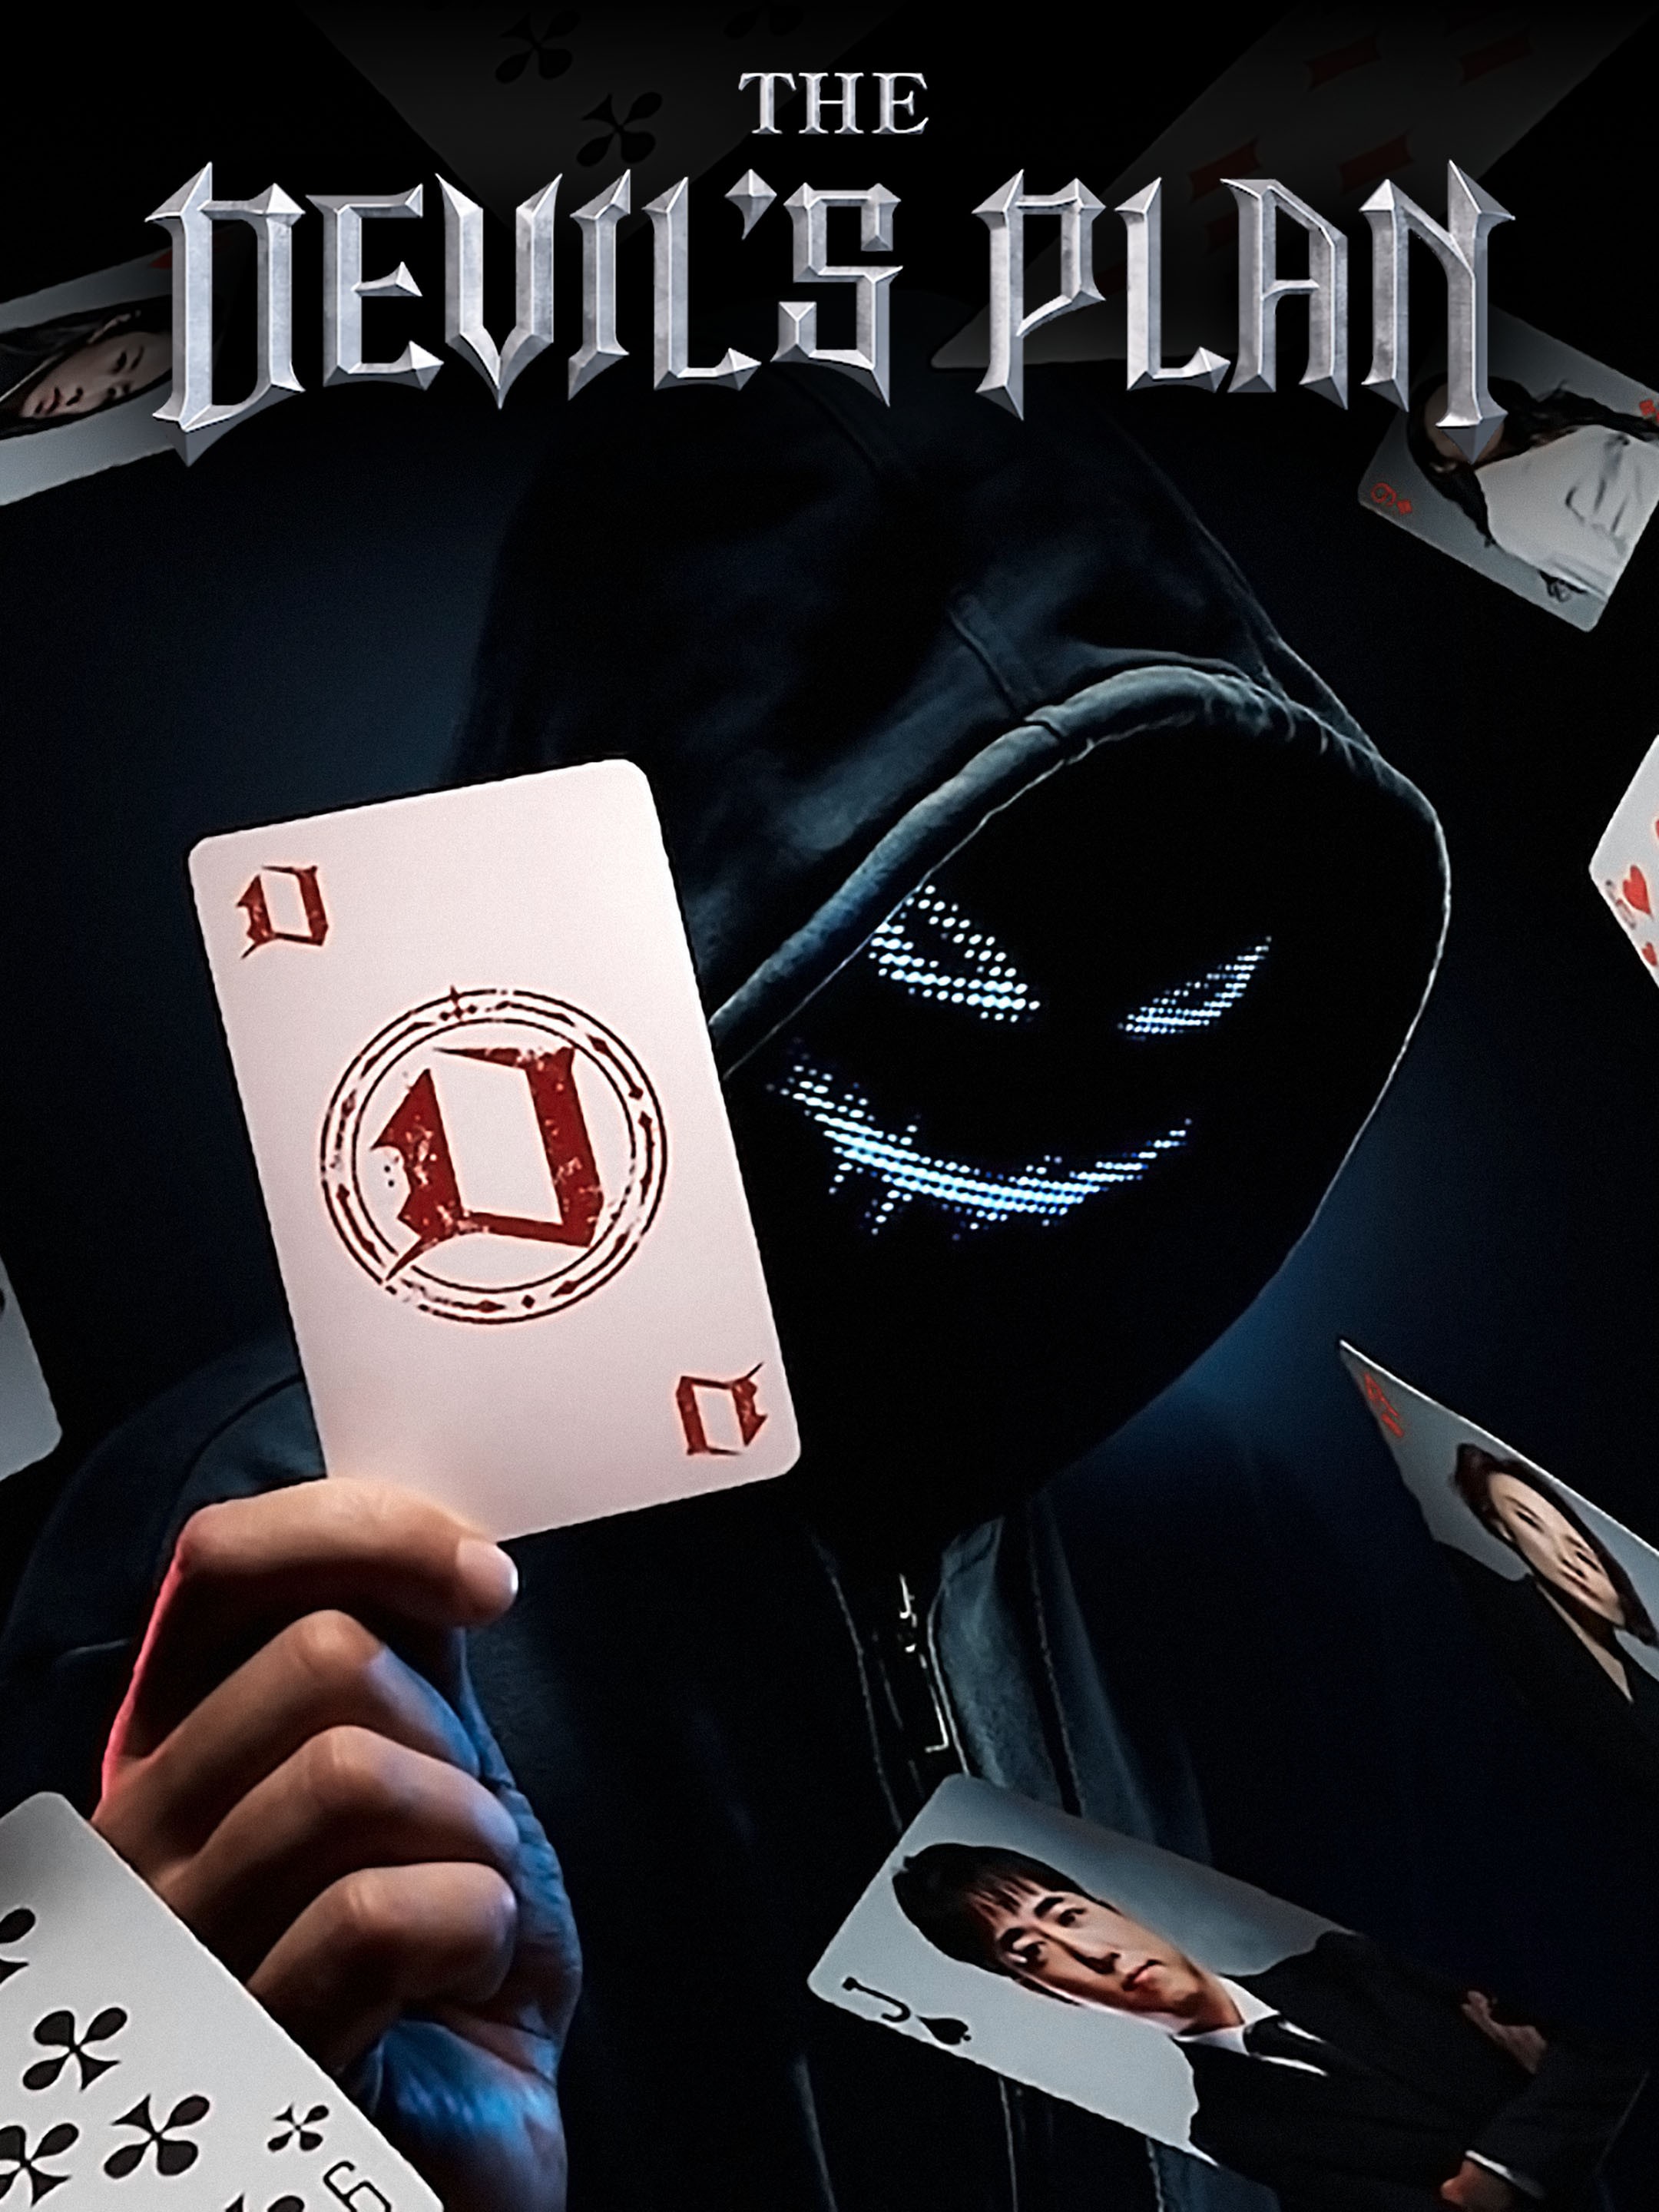 The Devil's Plan on Netflix: Cast, expected release date, and more